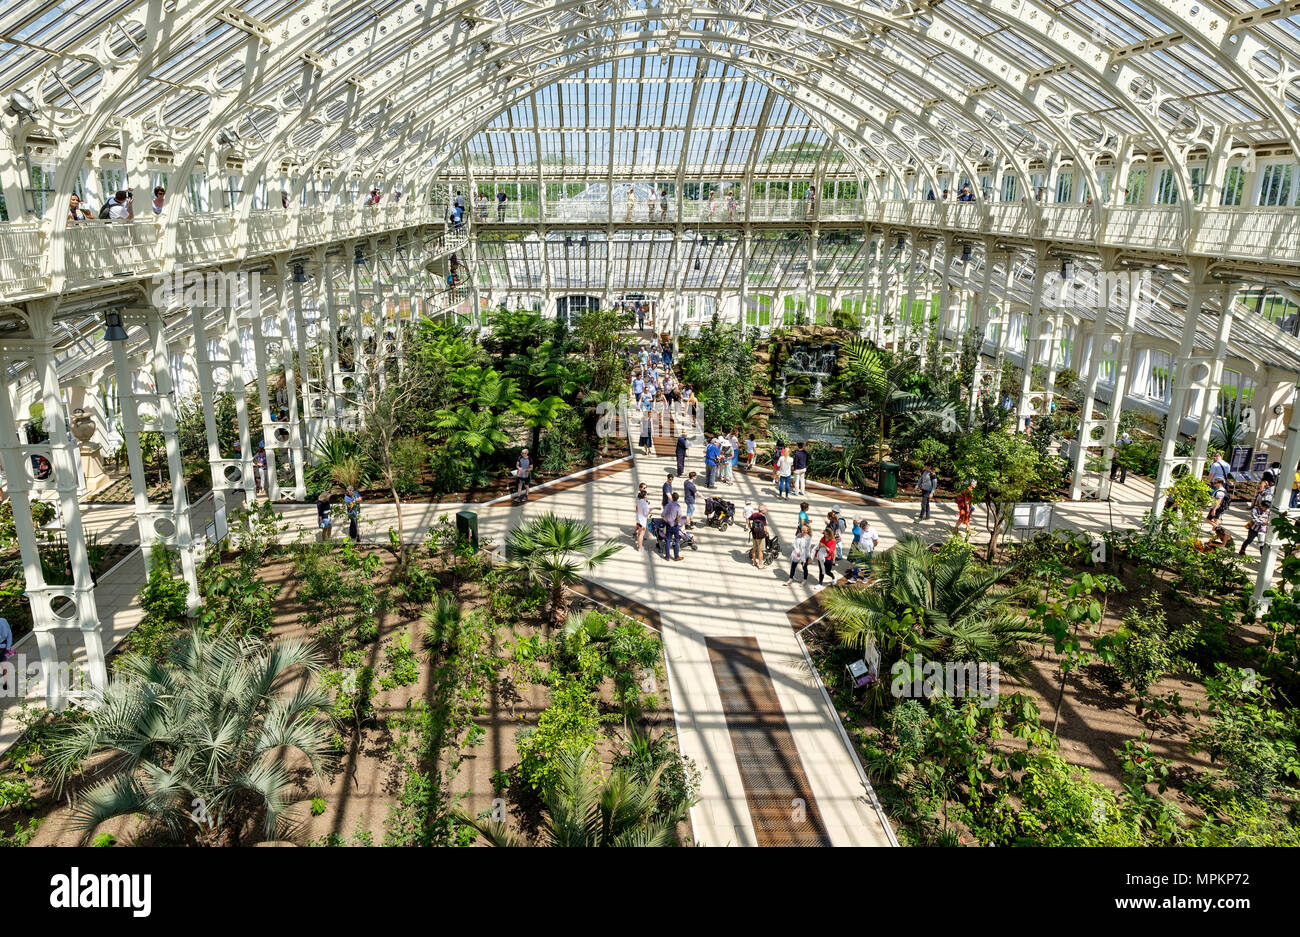 Kew Gardens newly restored Temperate House the largest Victorian glass house in the world grade 1 listed Stock Photo